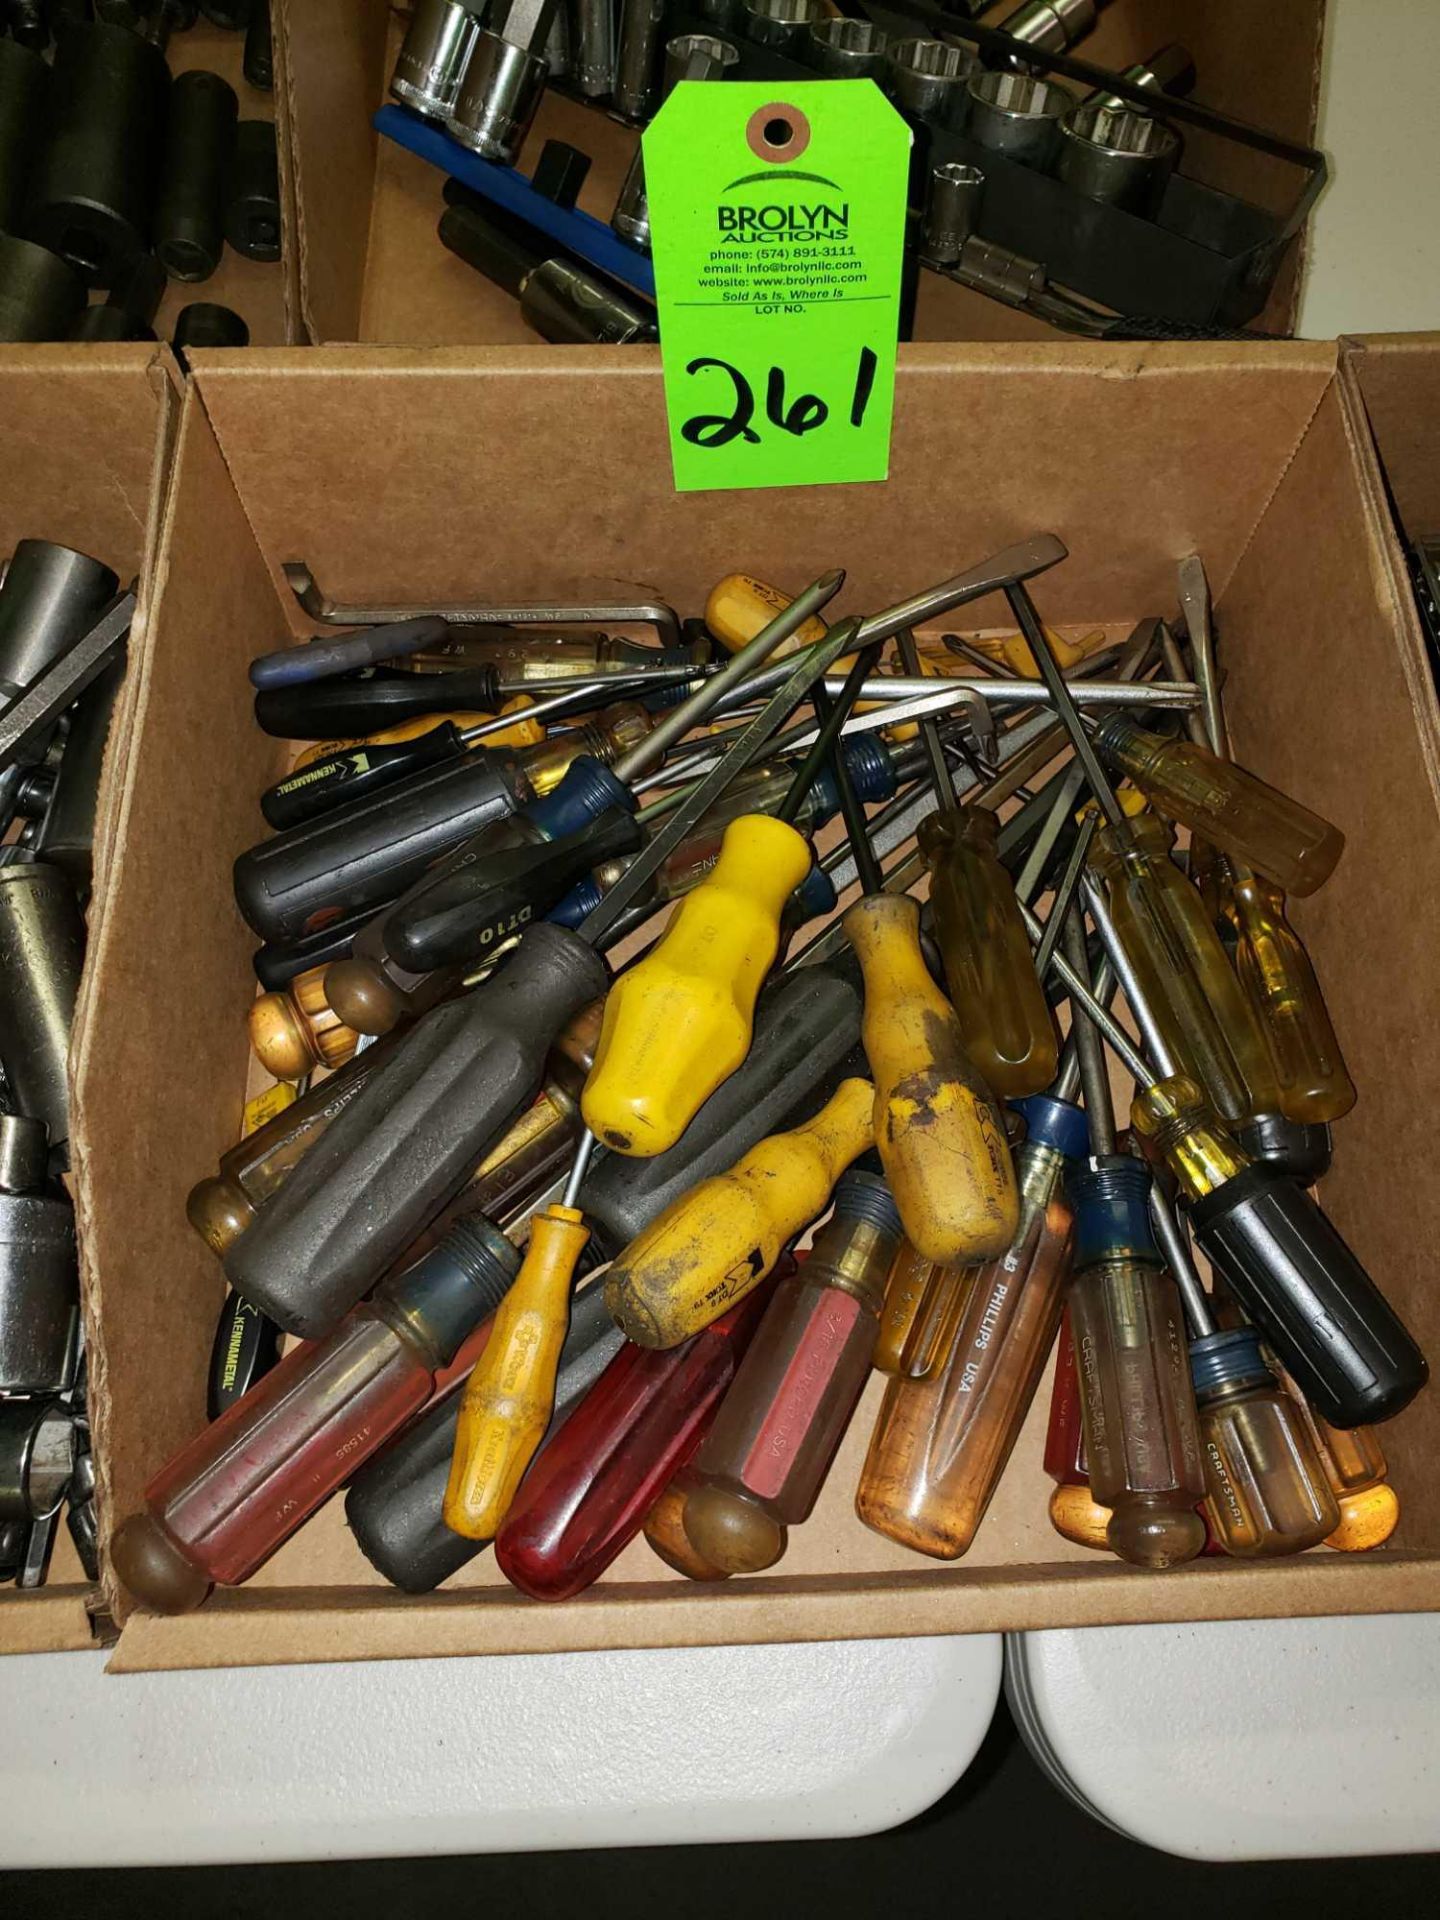 Lot of assorted screwdrivers.